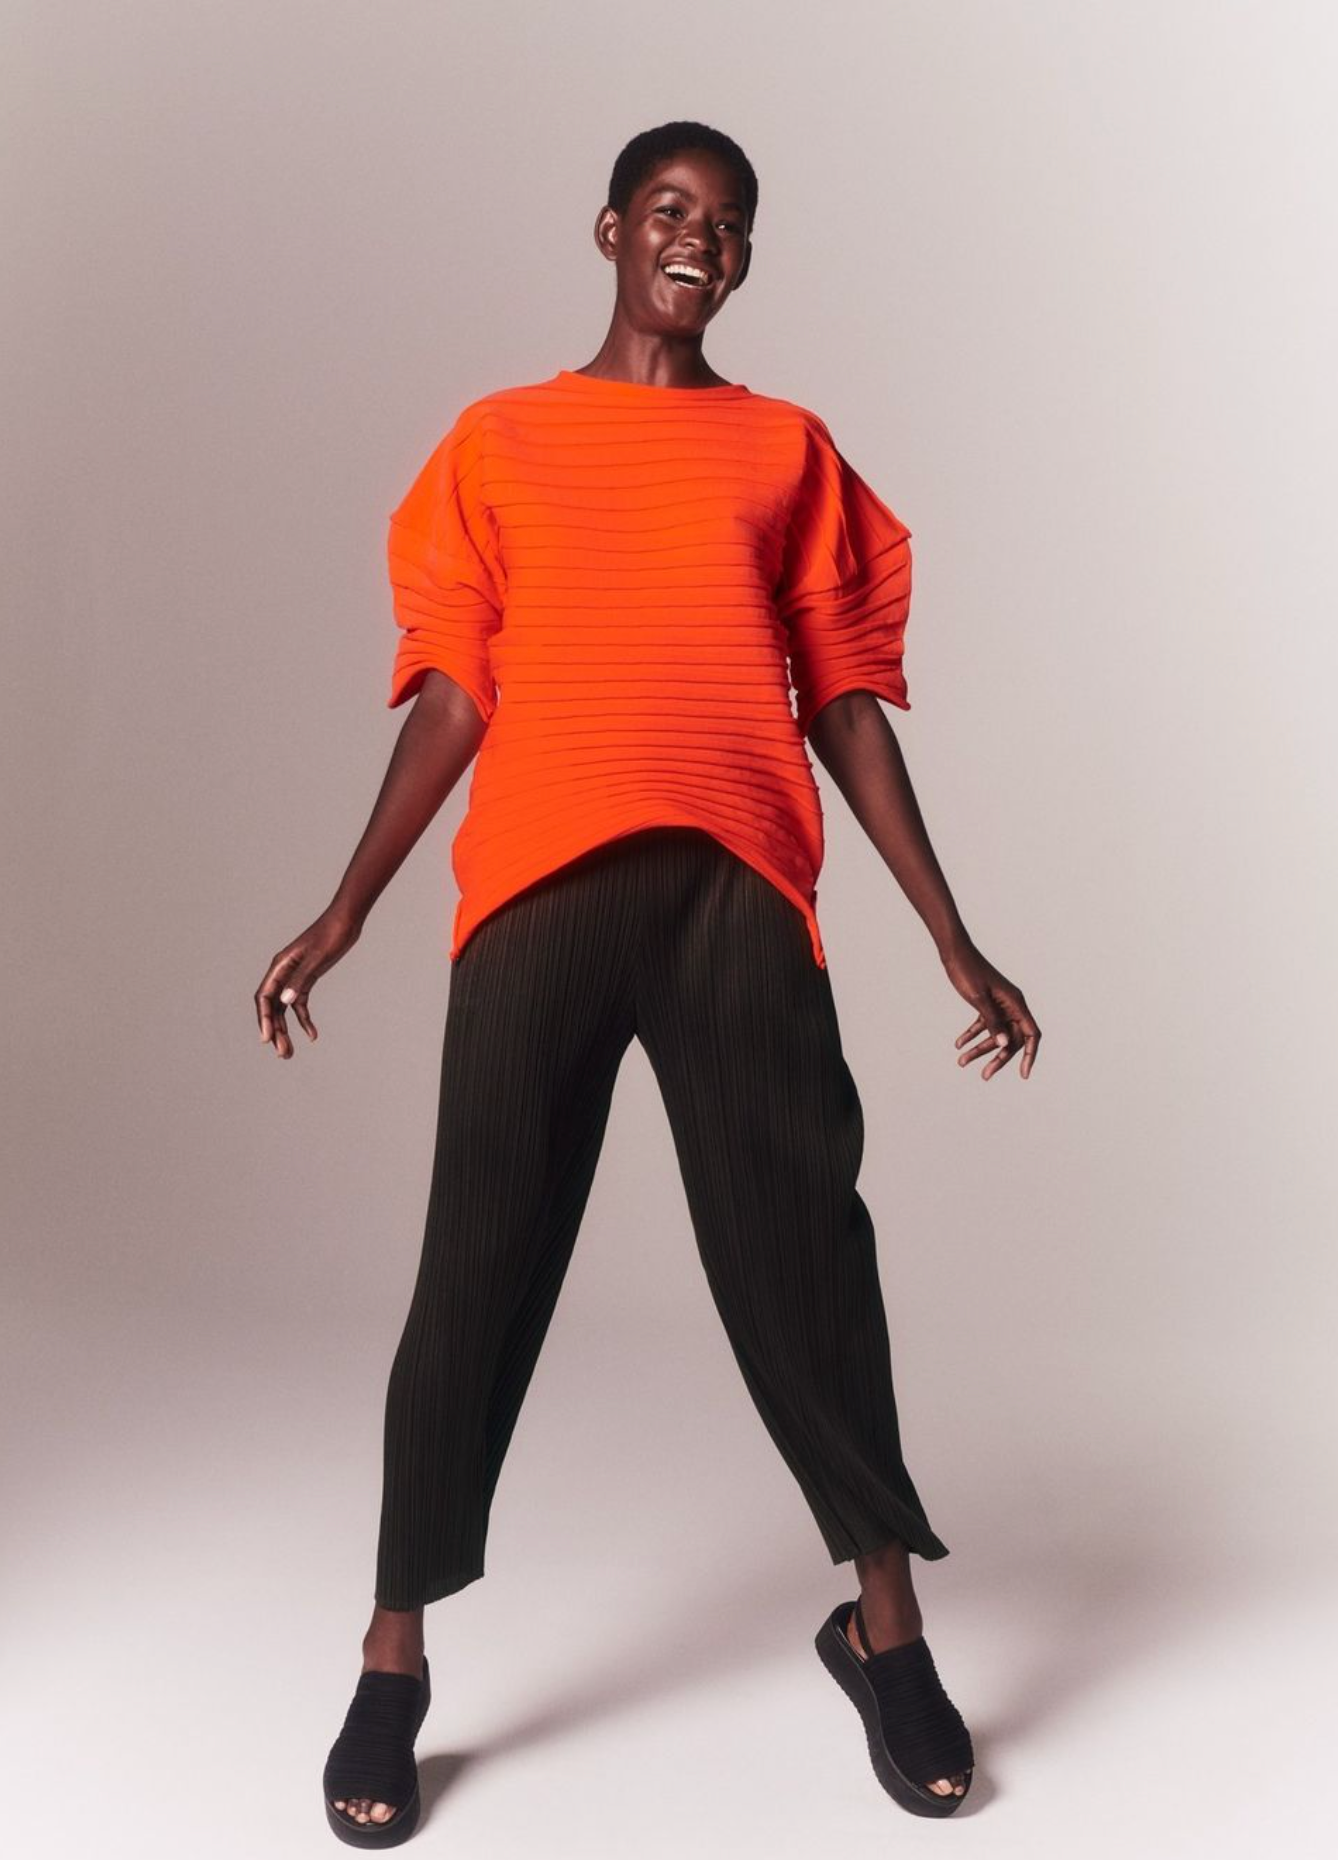 Short-sleeved knitted top, bright orange